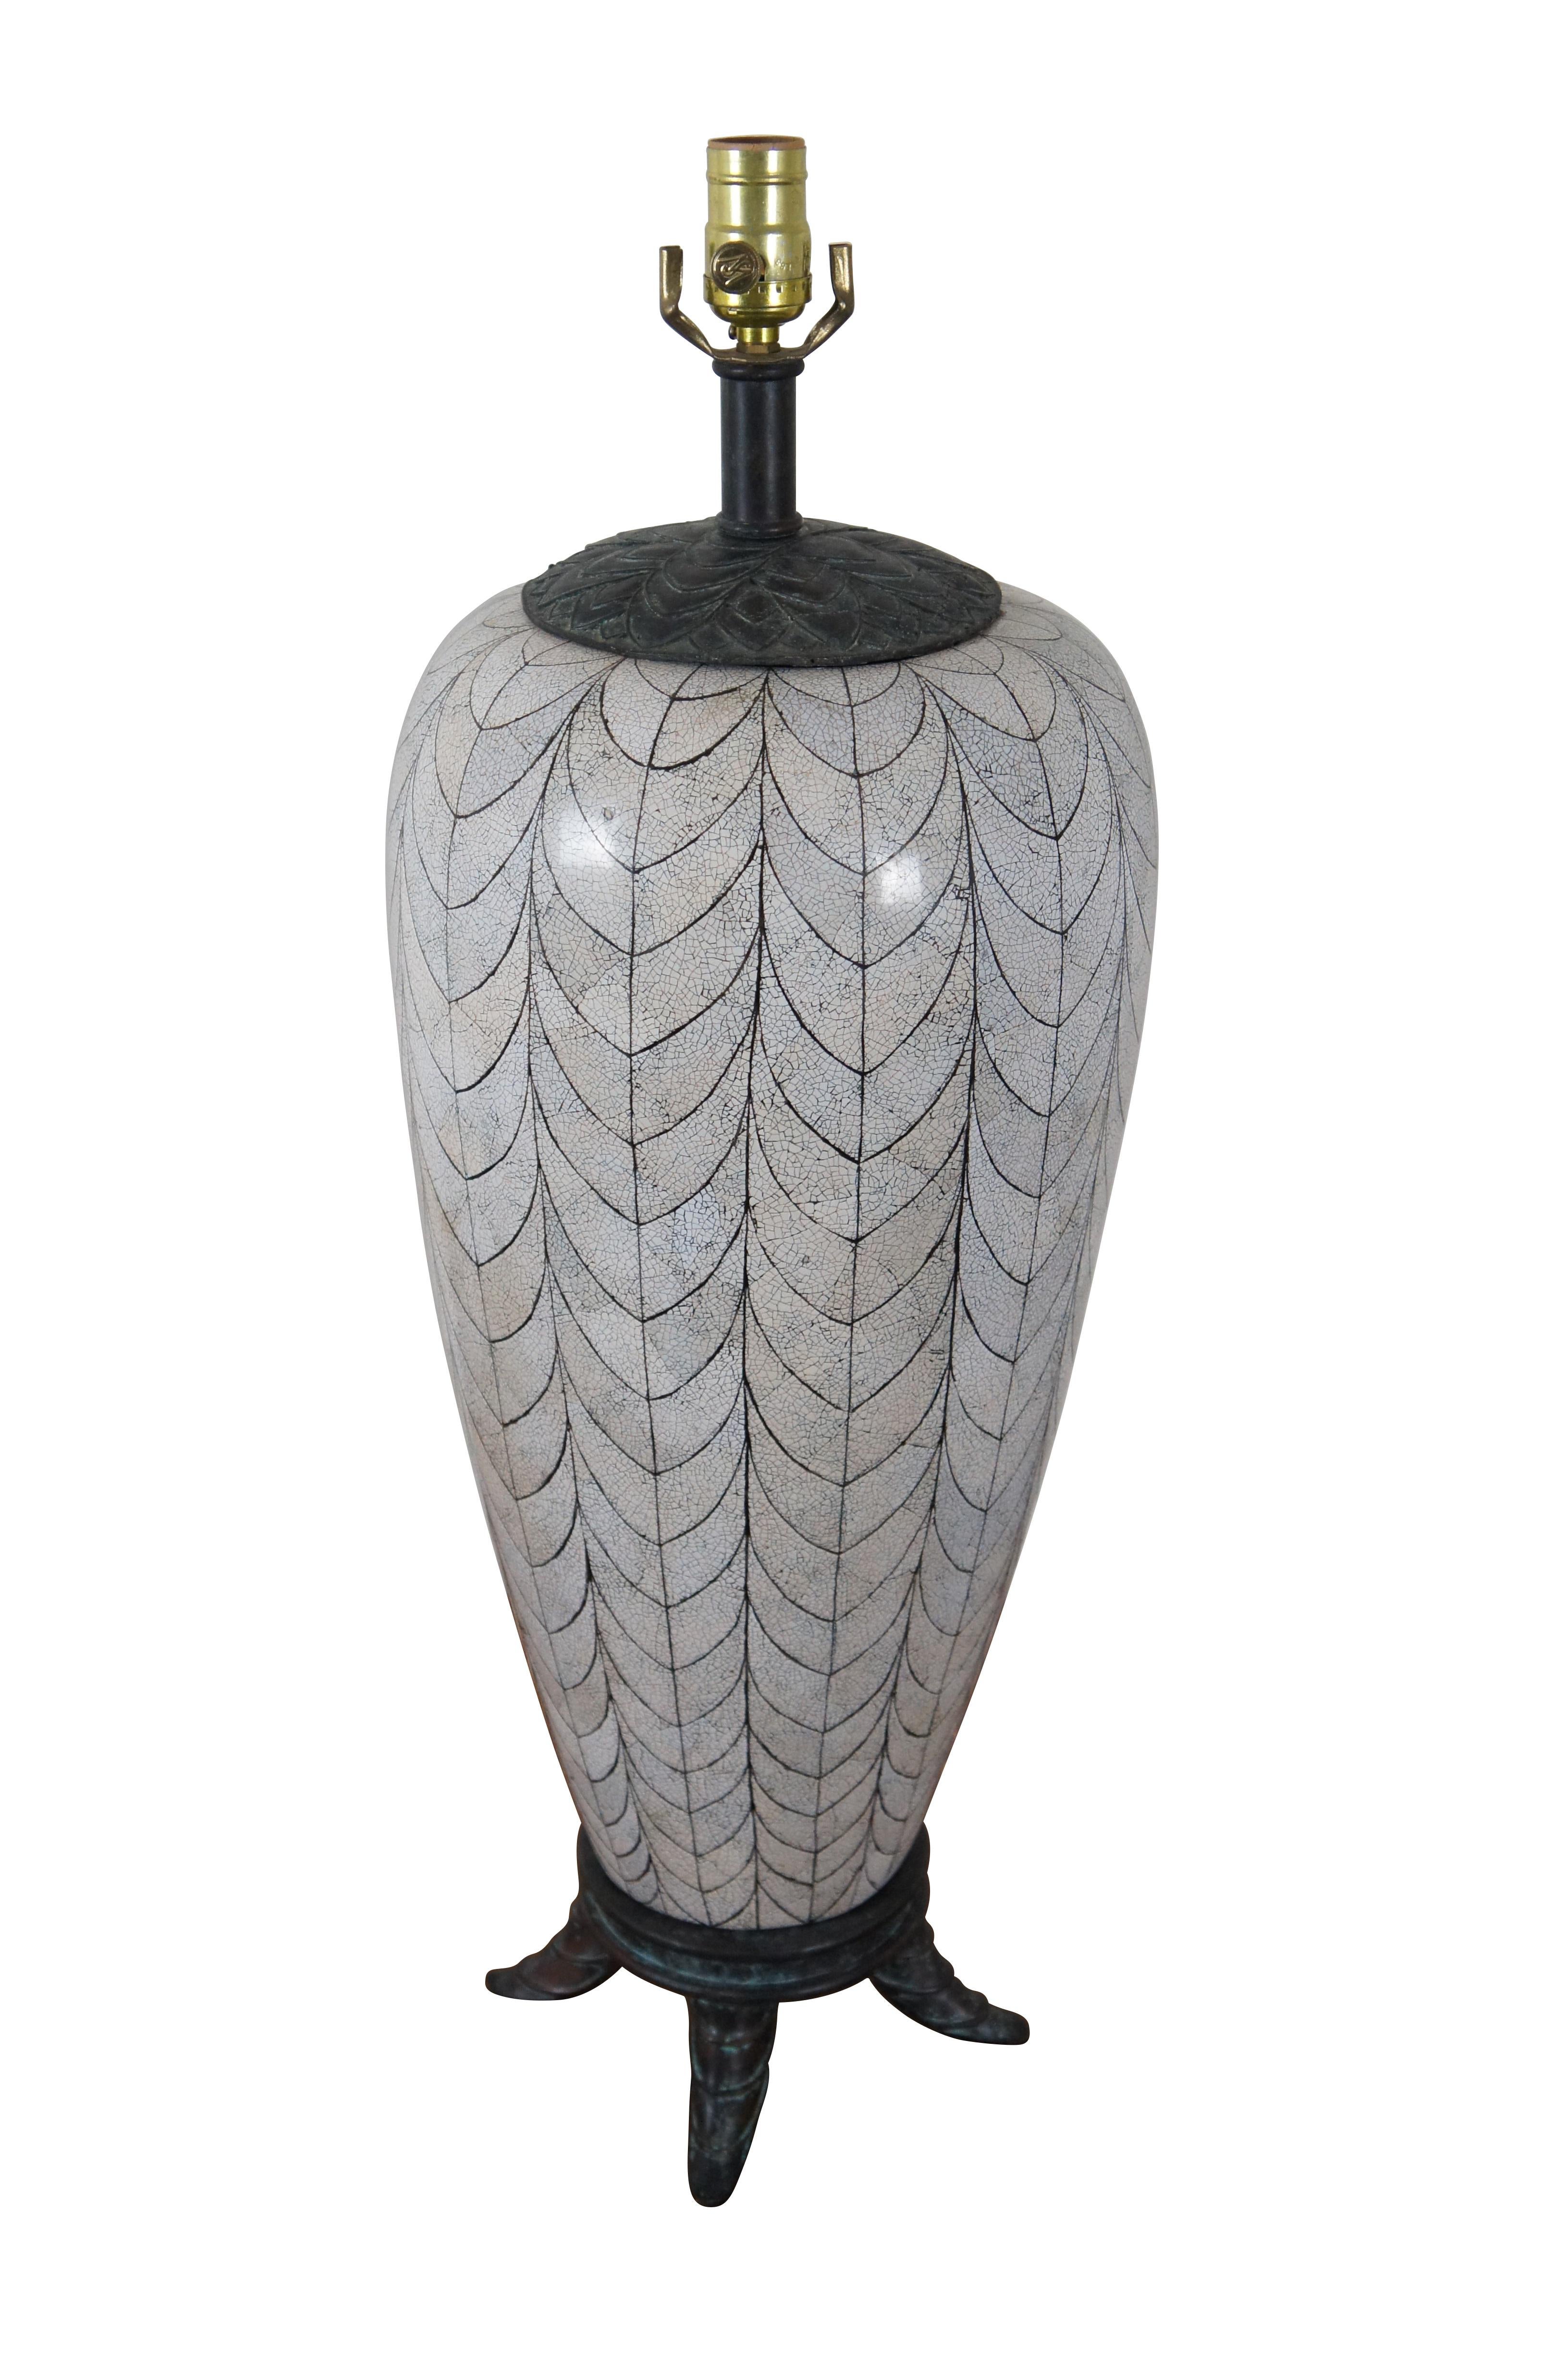 Vintage Maitland Smith table in the shape of a tall ginger jar / urn featuring a white shell mosaic in a scalloped feather or leaf vein pattern under a smooth lacquer finish. Lotus flower lid and round footed base are bronze with a factory